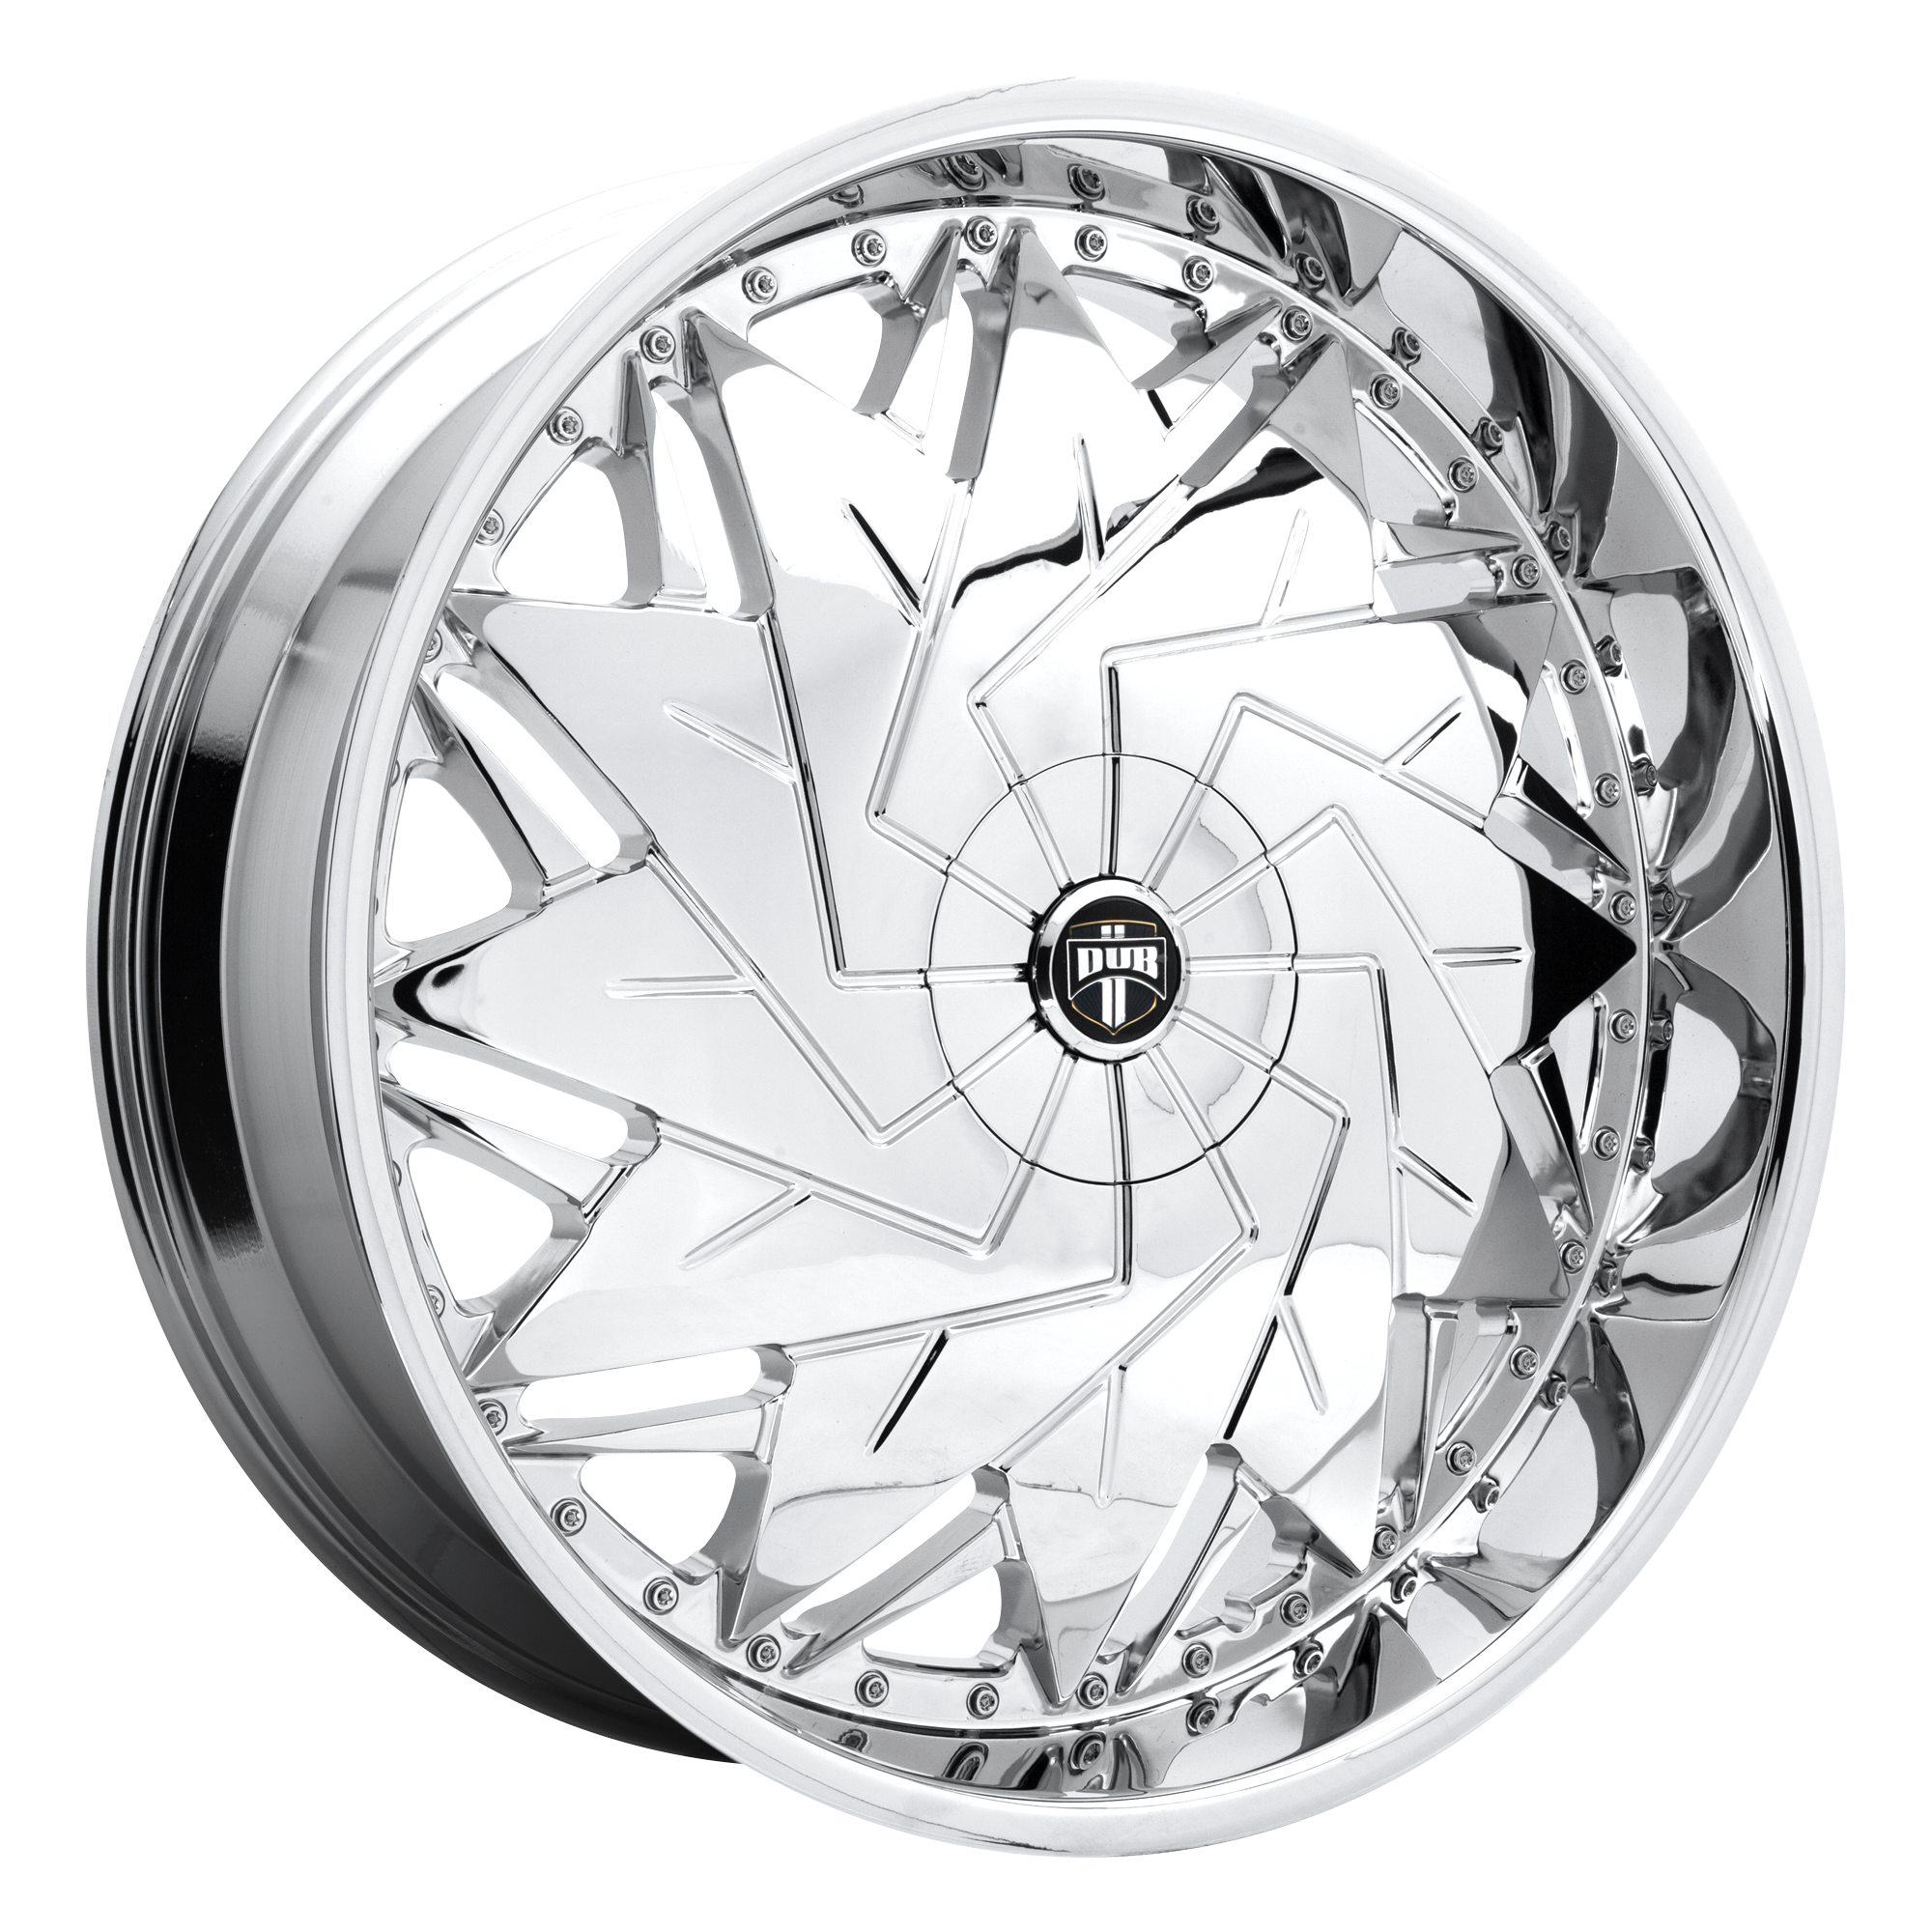 DAZR 26x10 5x120.65/5x127.00 CHROME PLATED (5 mm) - Tires and Engine Performance